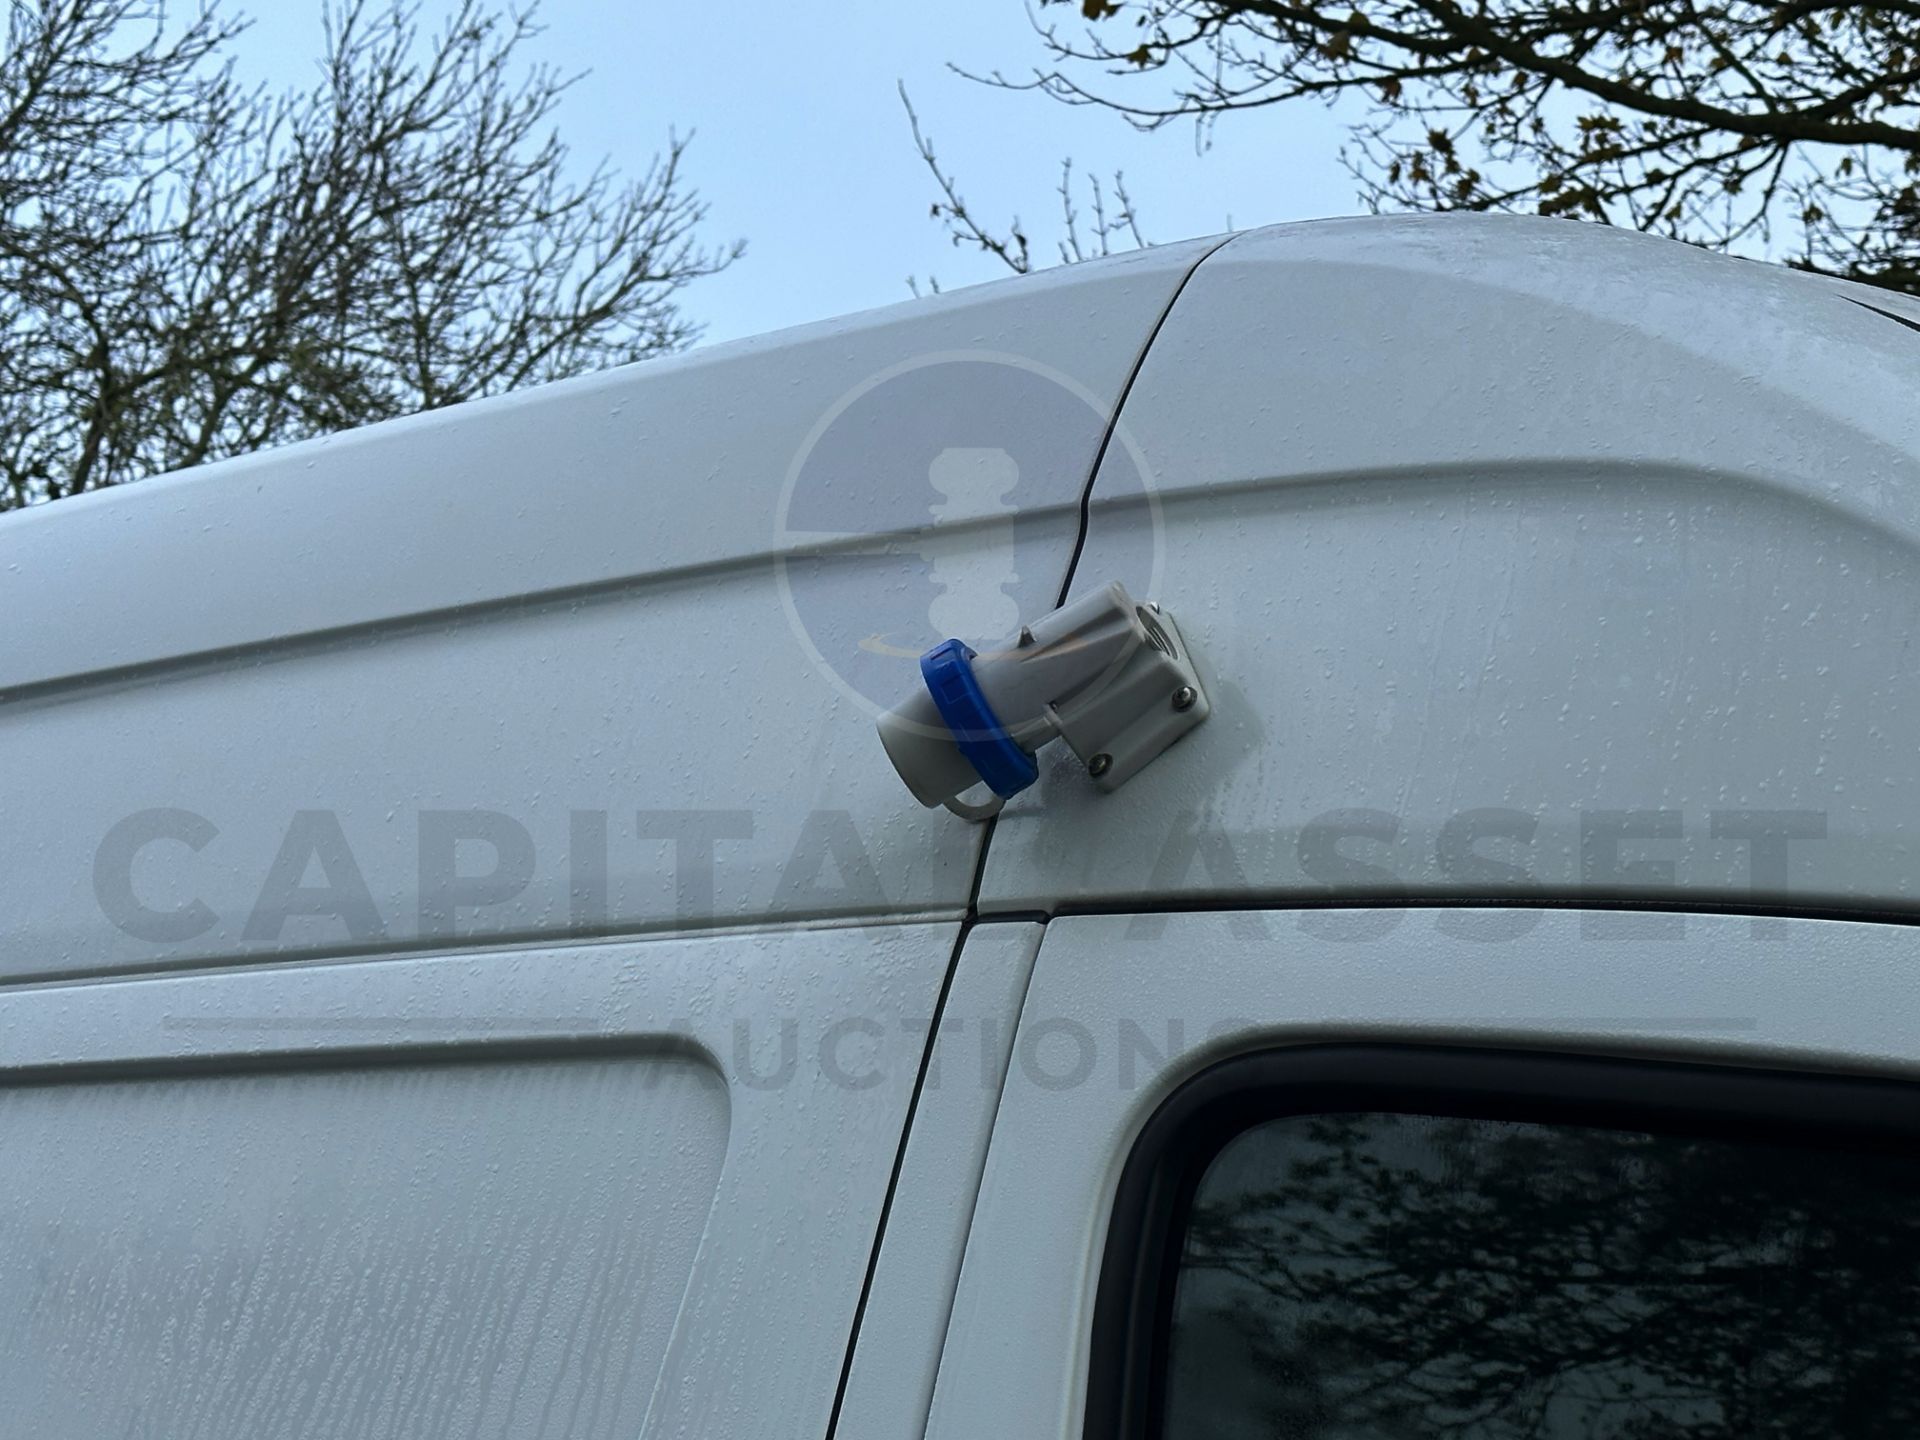 MERCEDES-BENZ SPRINTER 314 CDI *MWB - REFRIGERATED VAN* (2019 - FACELIFT MODEL) *OVERNIGHT STANDBY* - Image 18 of 45